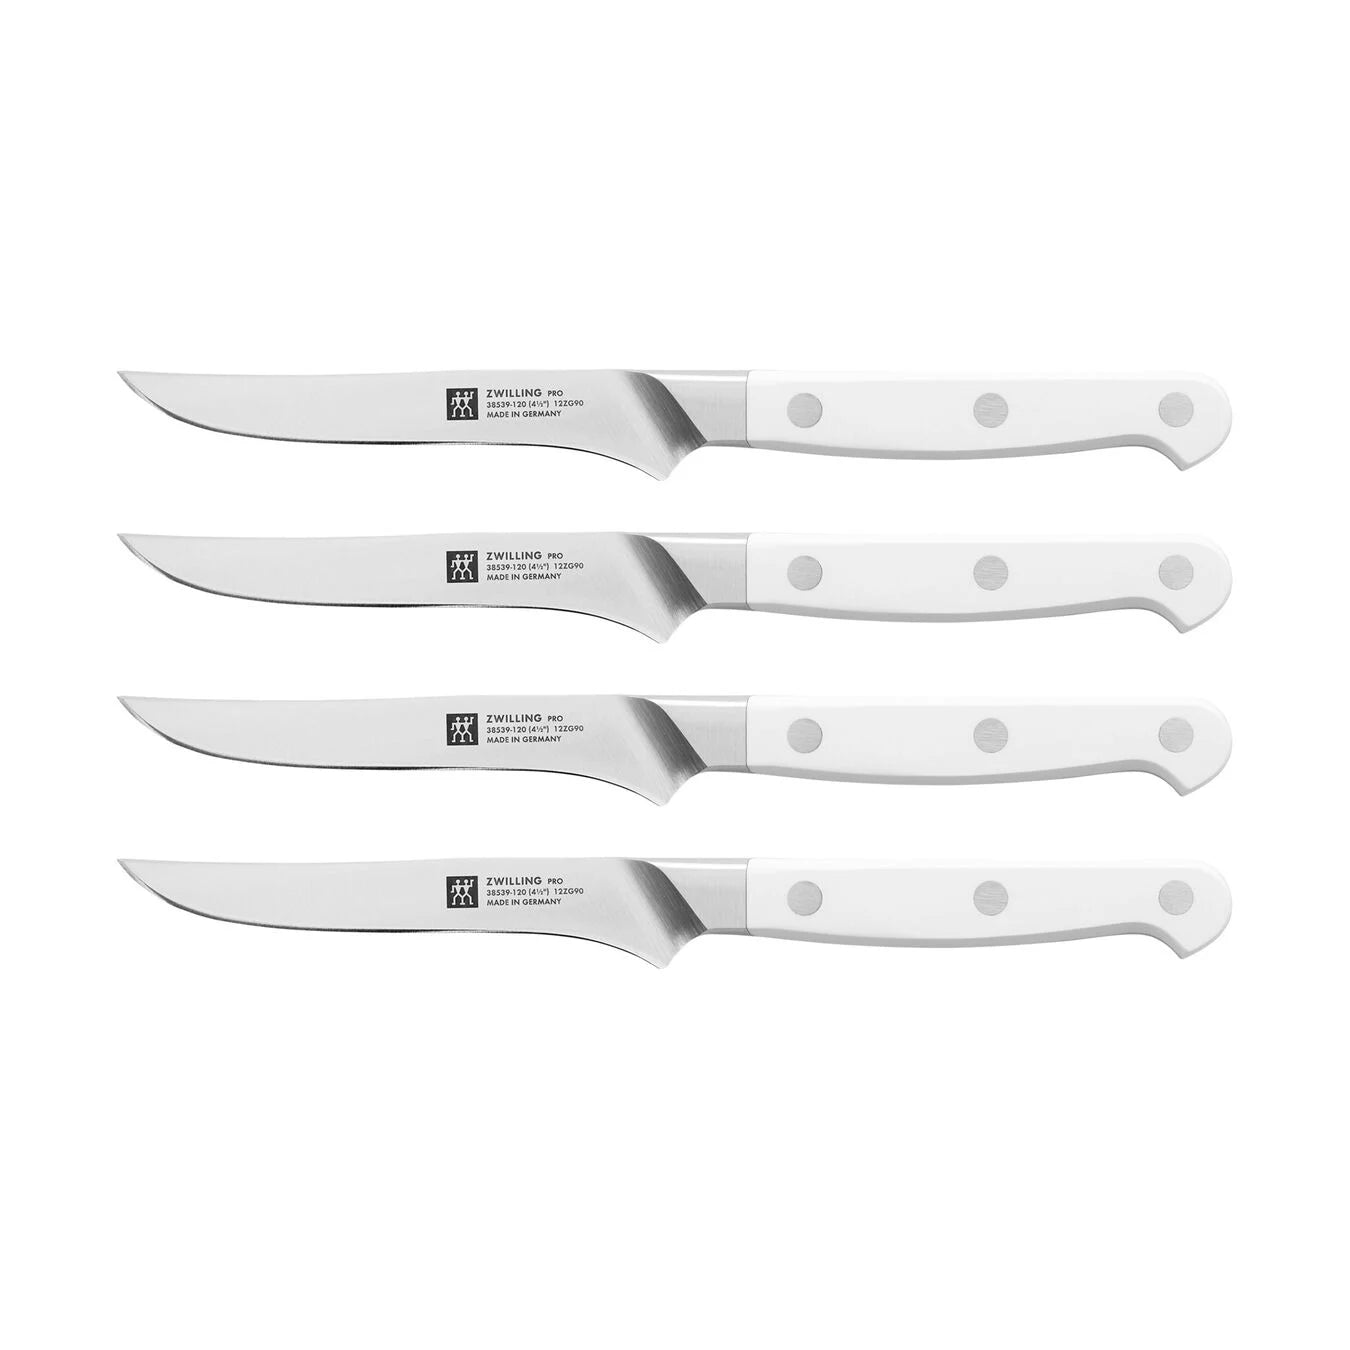 3 sets of 4 LAGUIOLE Steak Knives in White Marble, New -12 Count - FREE  SHIPPING